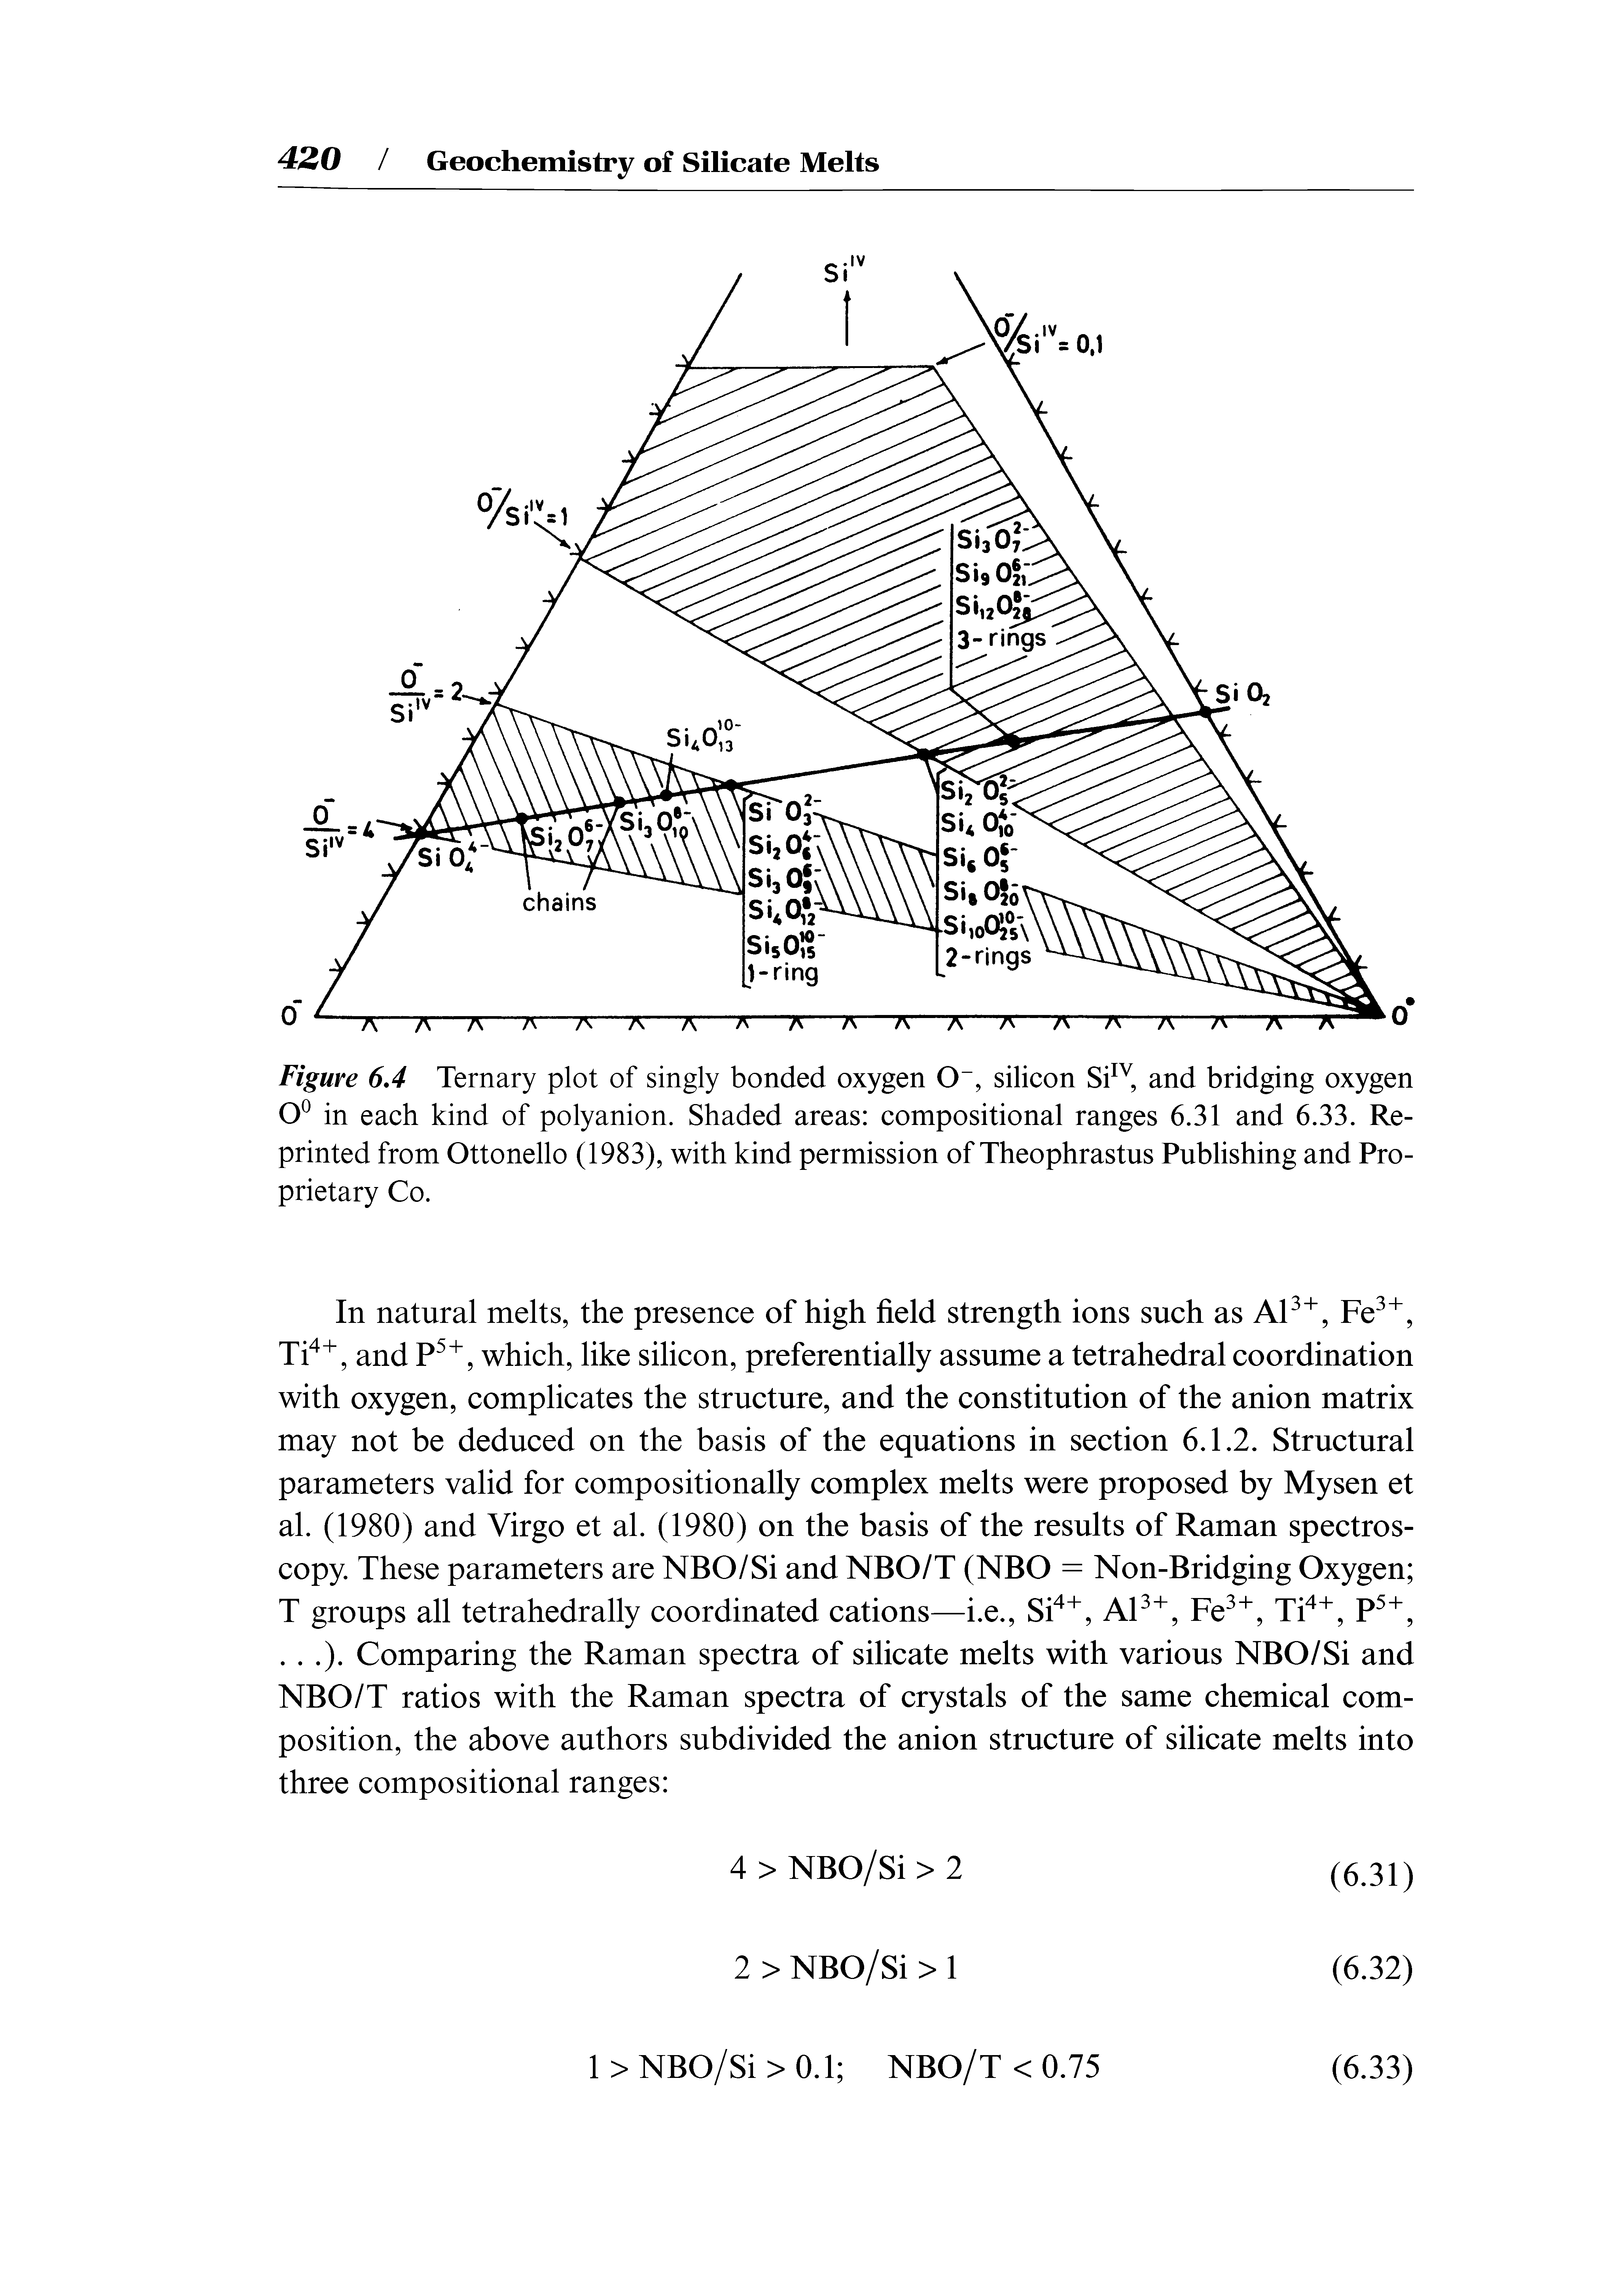 Figure 6,4 Ternary plot of singly bonded oxygen 0 , silicon Si and bridging oxygen in each kind of polyanion. Shaded areas compositional ranges 6.31 and 6.33. Reprinted from Ottonello (1983), with kind permission of Theophrastus Publishing and Proprietary Co.